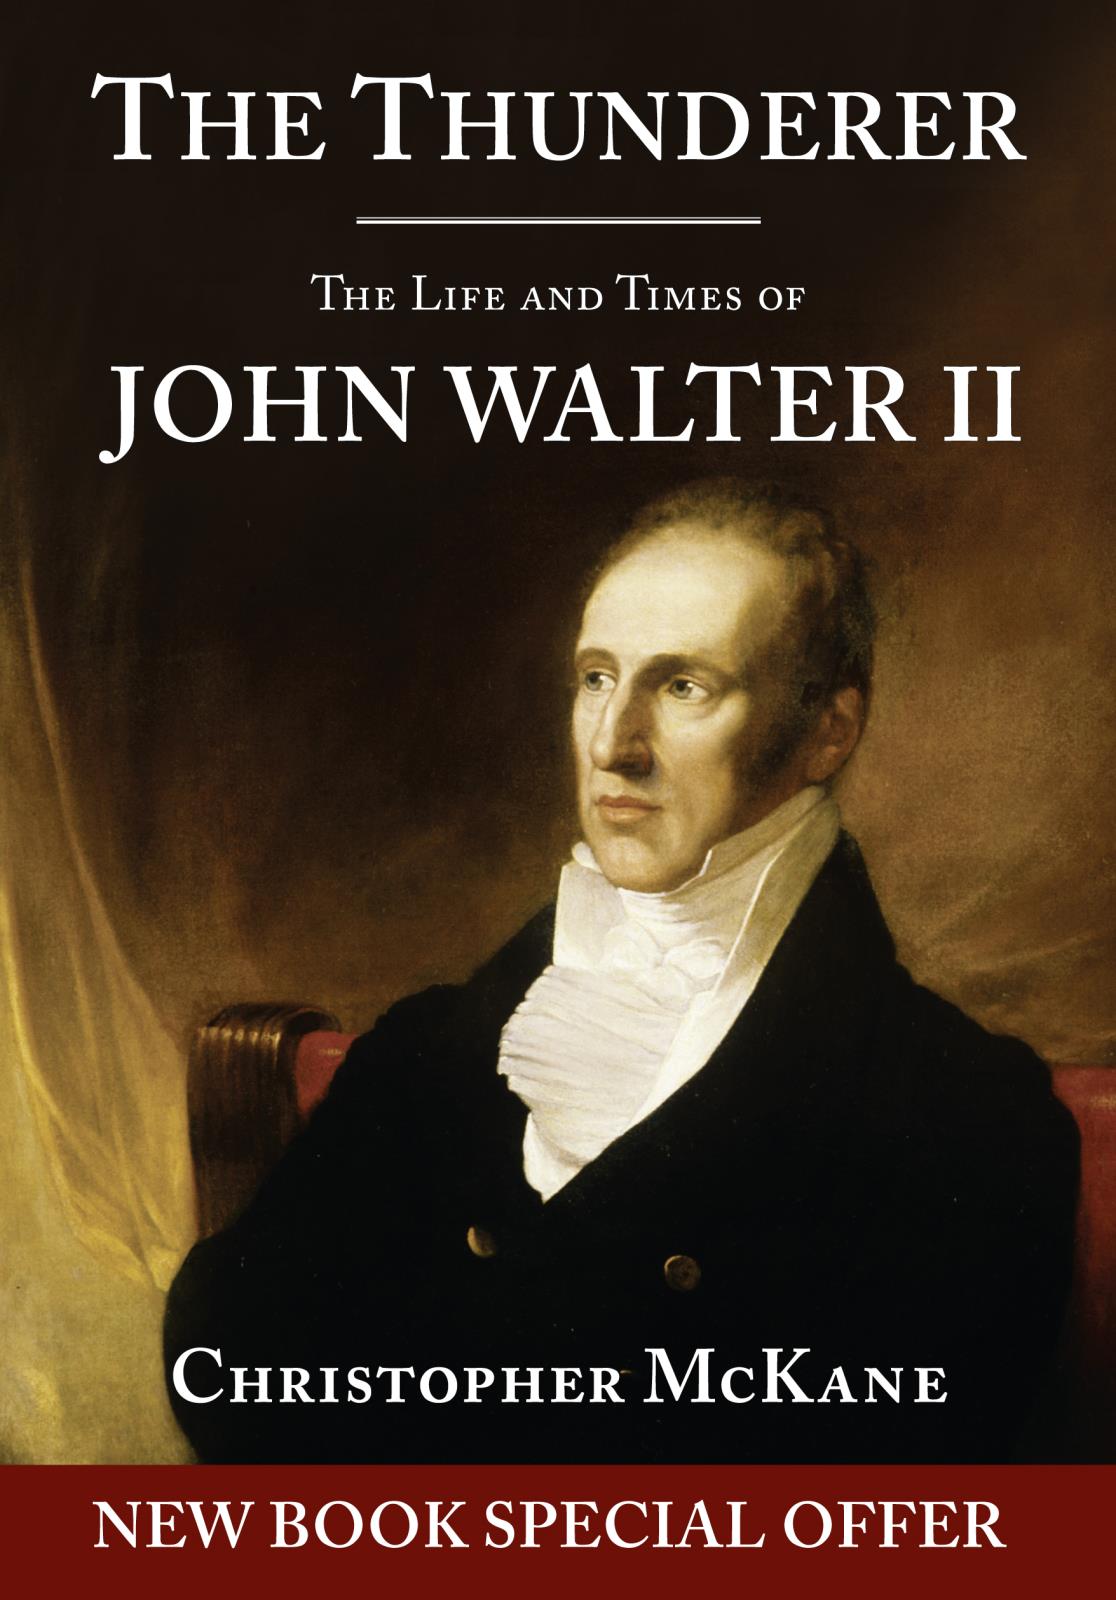 The Life and Times of John Walter II by Christopher McKane